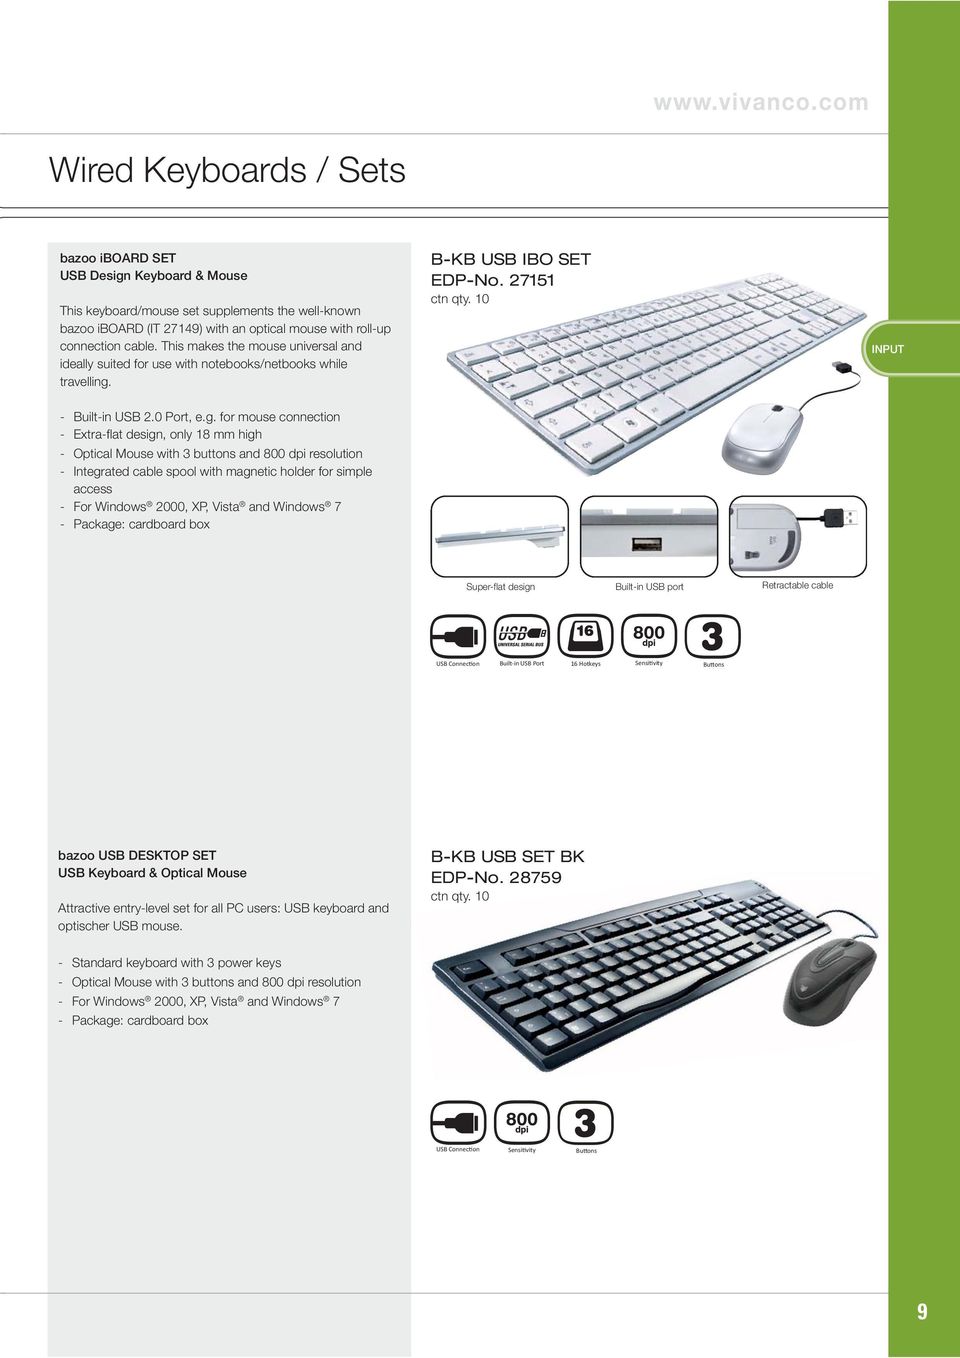 This makes the mouse universal and ideally suited for use with notebooks/netbooks while travelling.